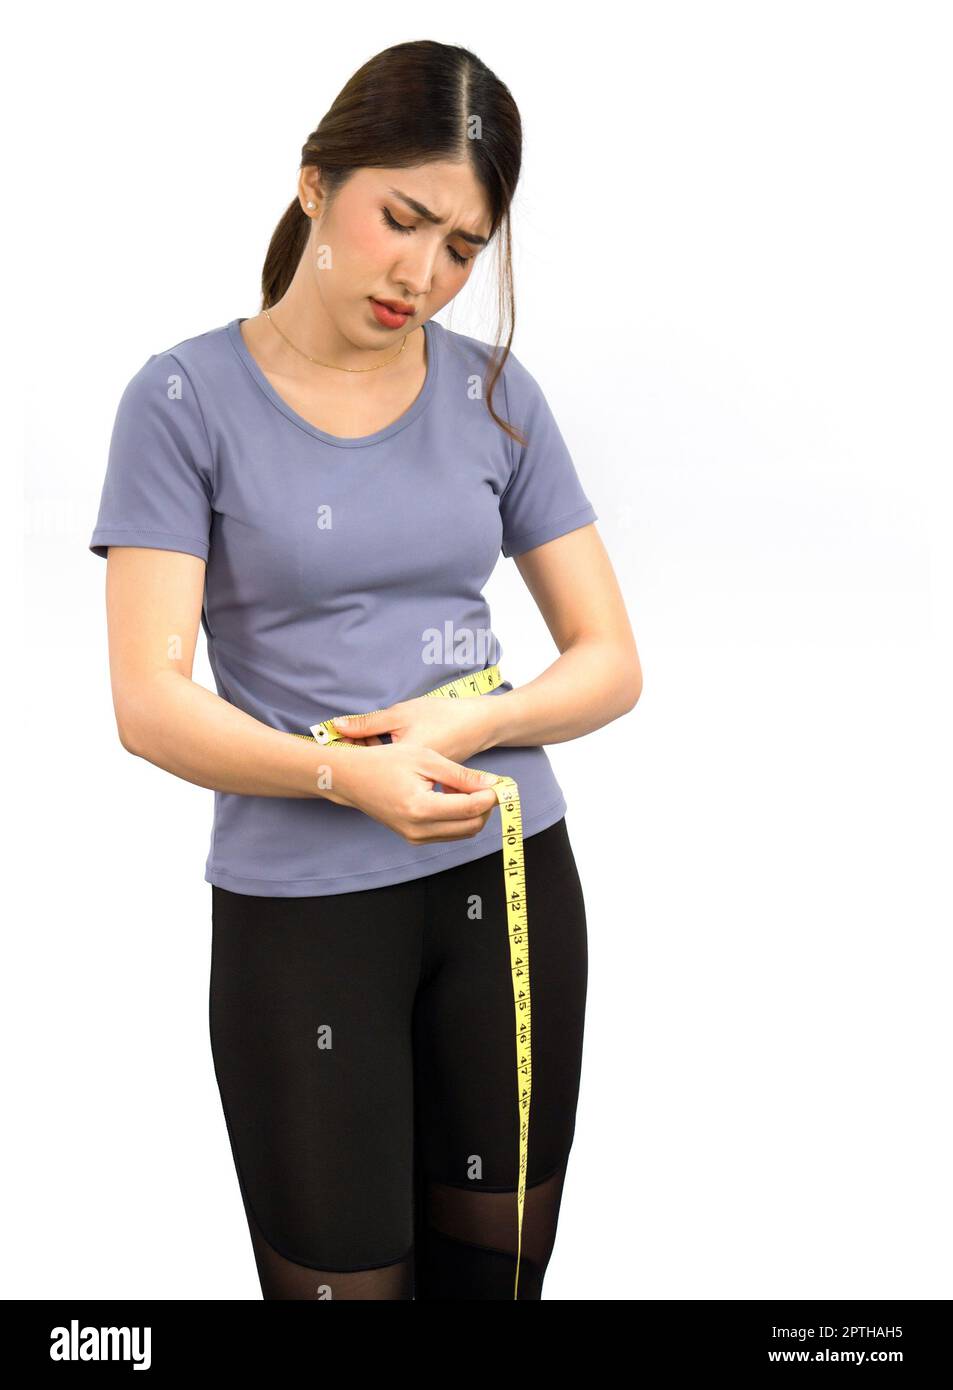 Woman holding tape measure around waist - Stock Image - F020/7701 - Science  Photo Library